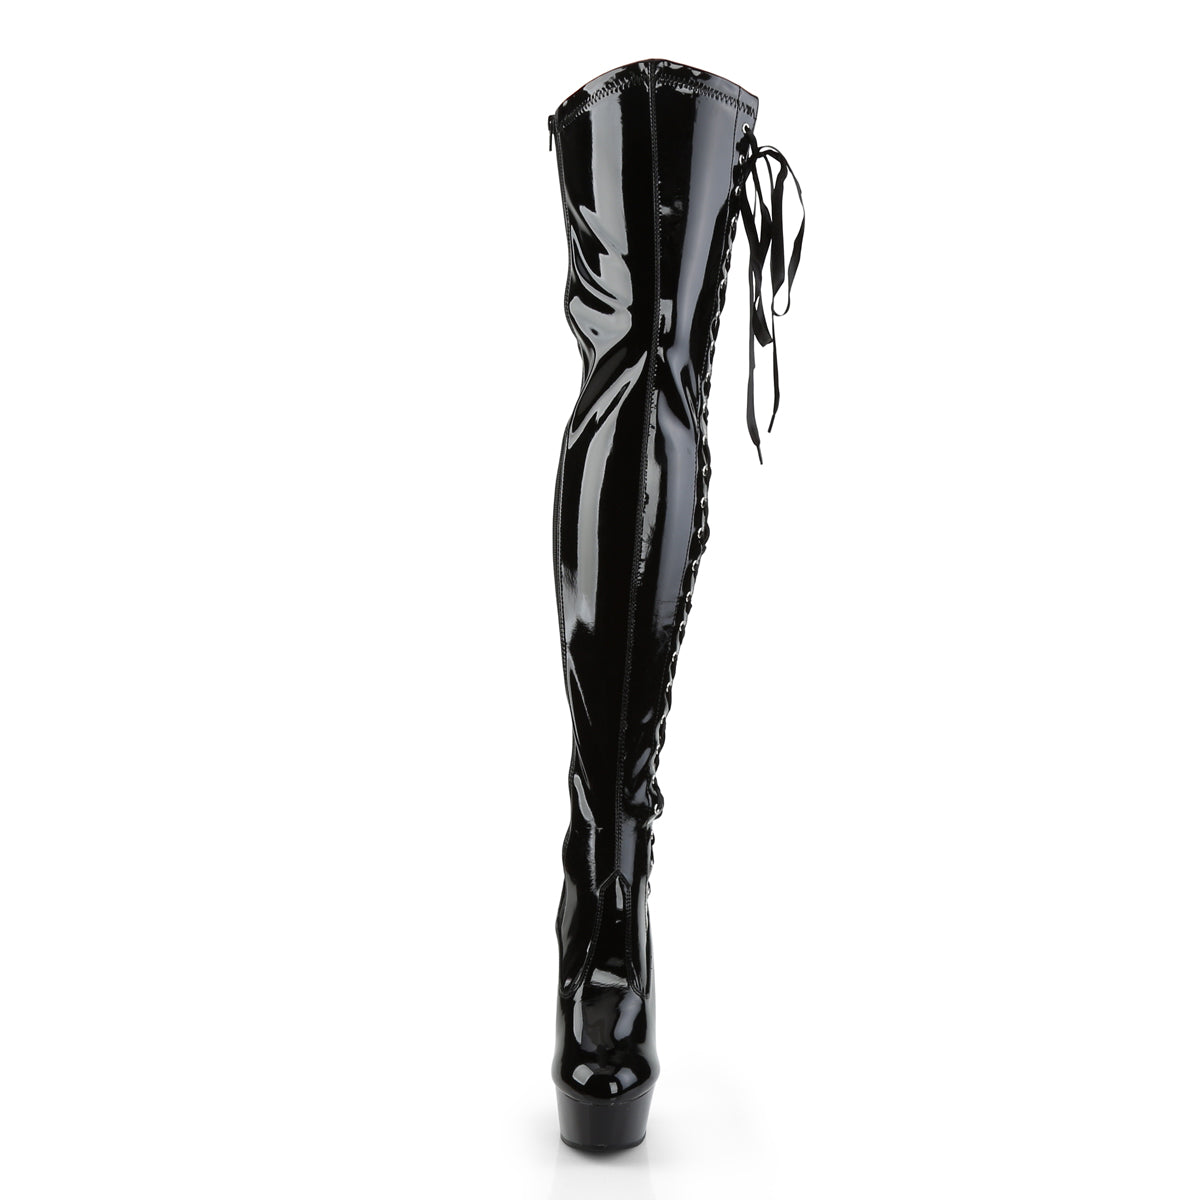 DELIGHT-3050 6" Heel Black Stretch Patent Pole Dancer Boots-Pleaser- Sexy Shoes Alternative Footwear